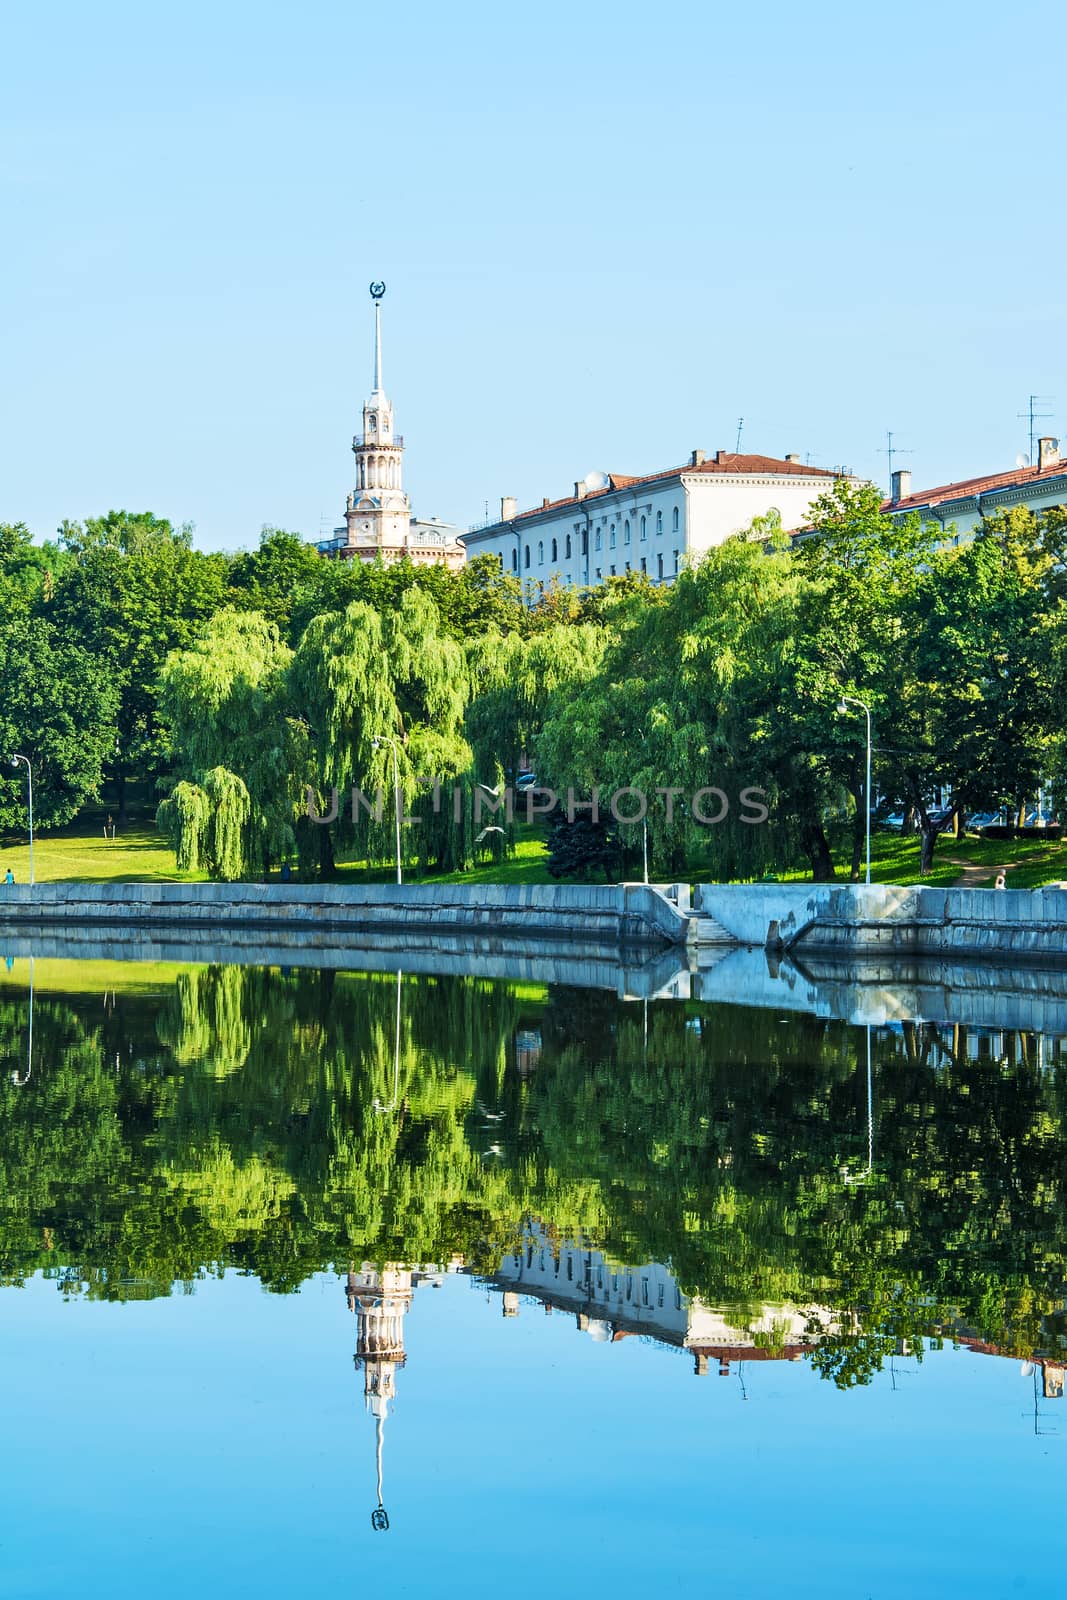 City landscape with reflection shore in the calm water of the ri by Grommik